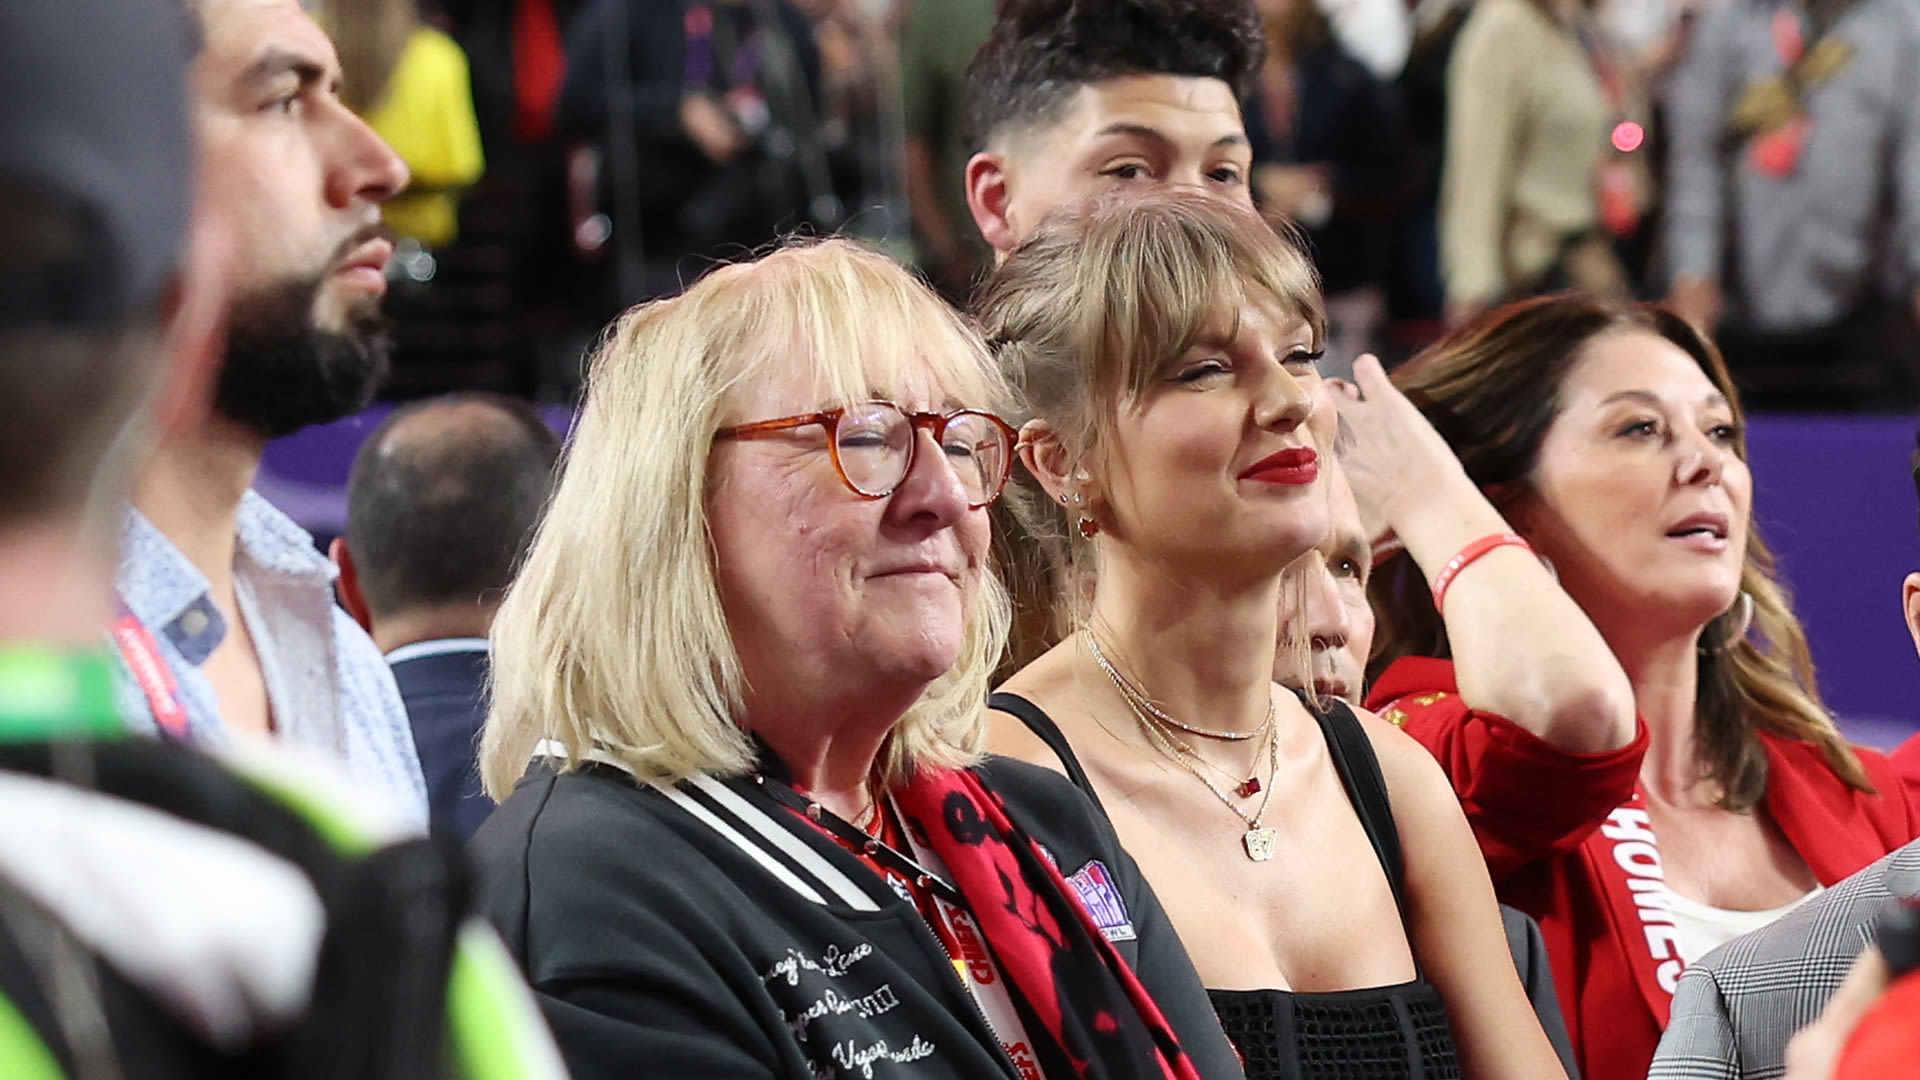 Travis' mom Donna says 'time will tell' on future of Taylor Swift romance